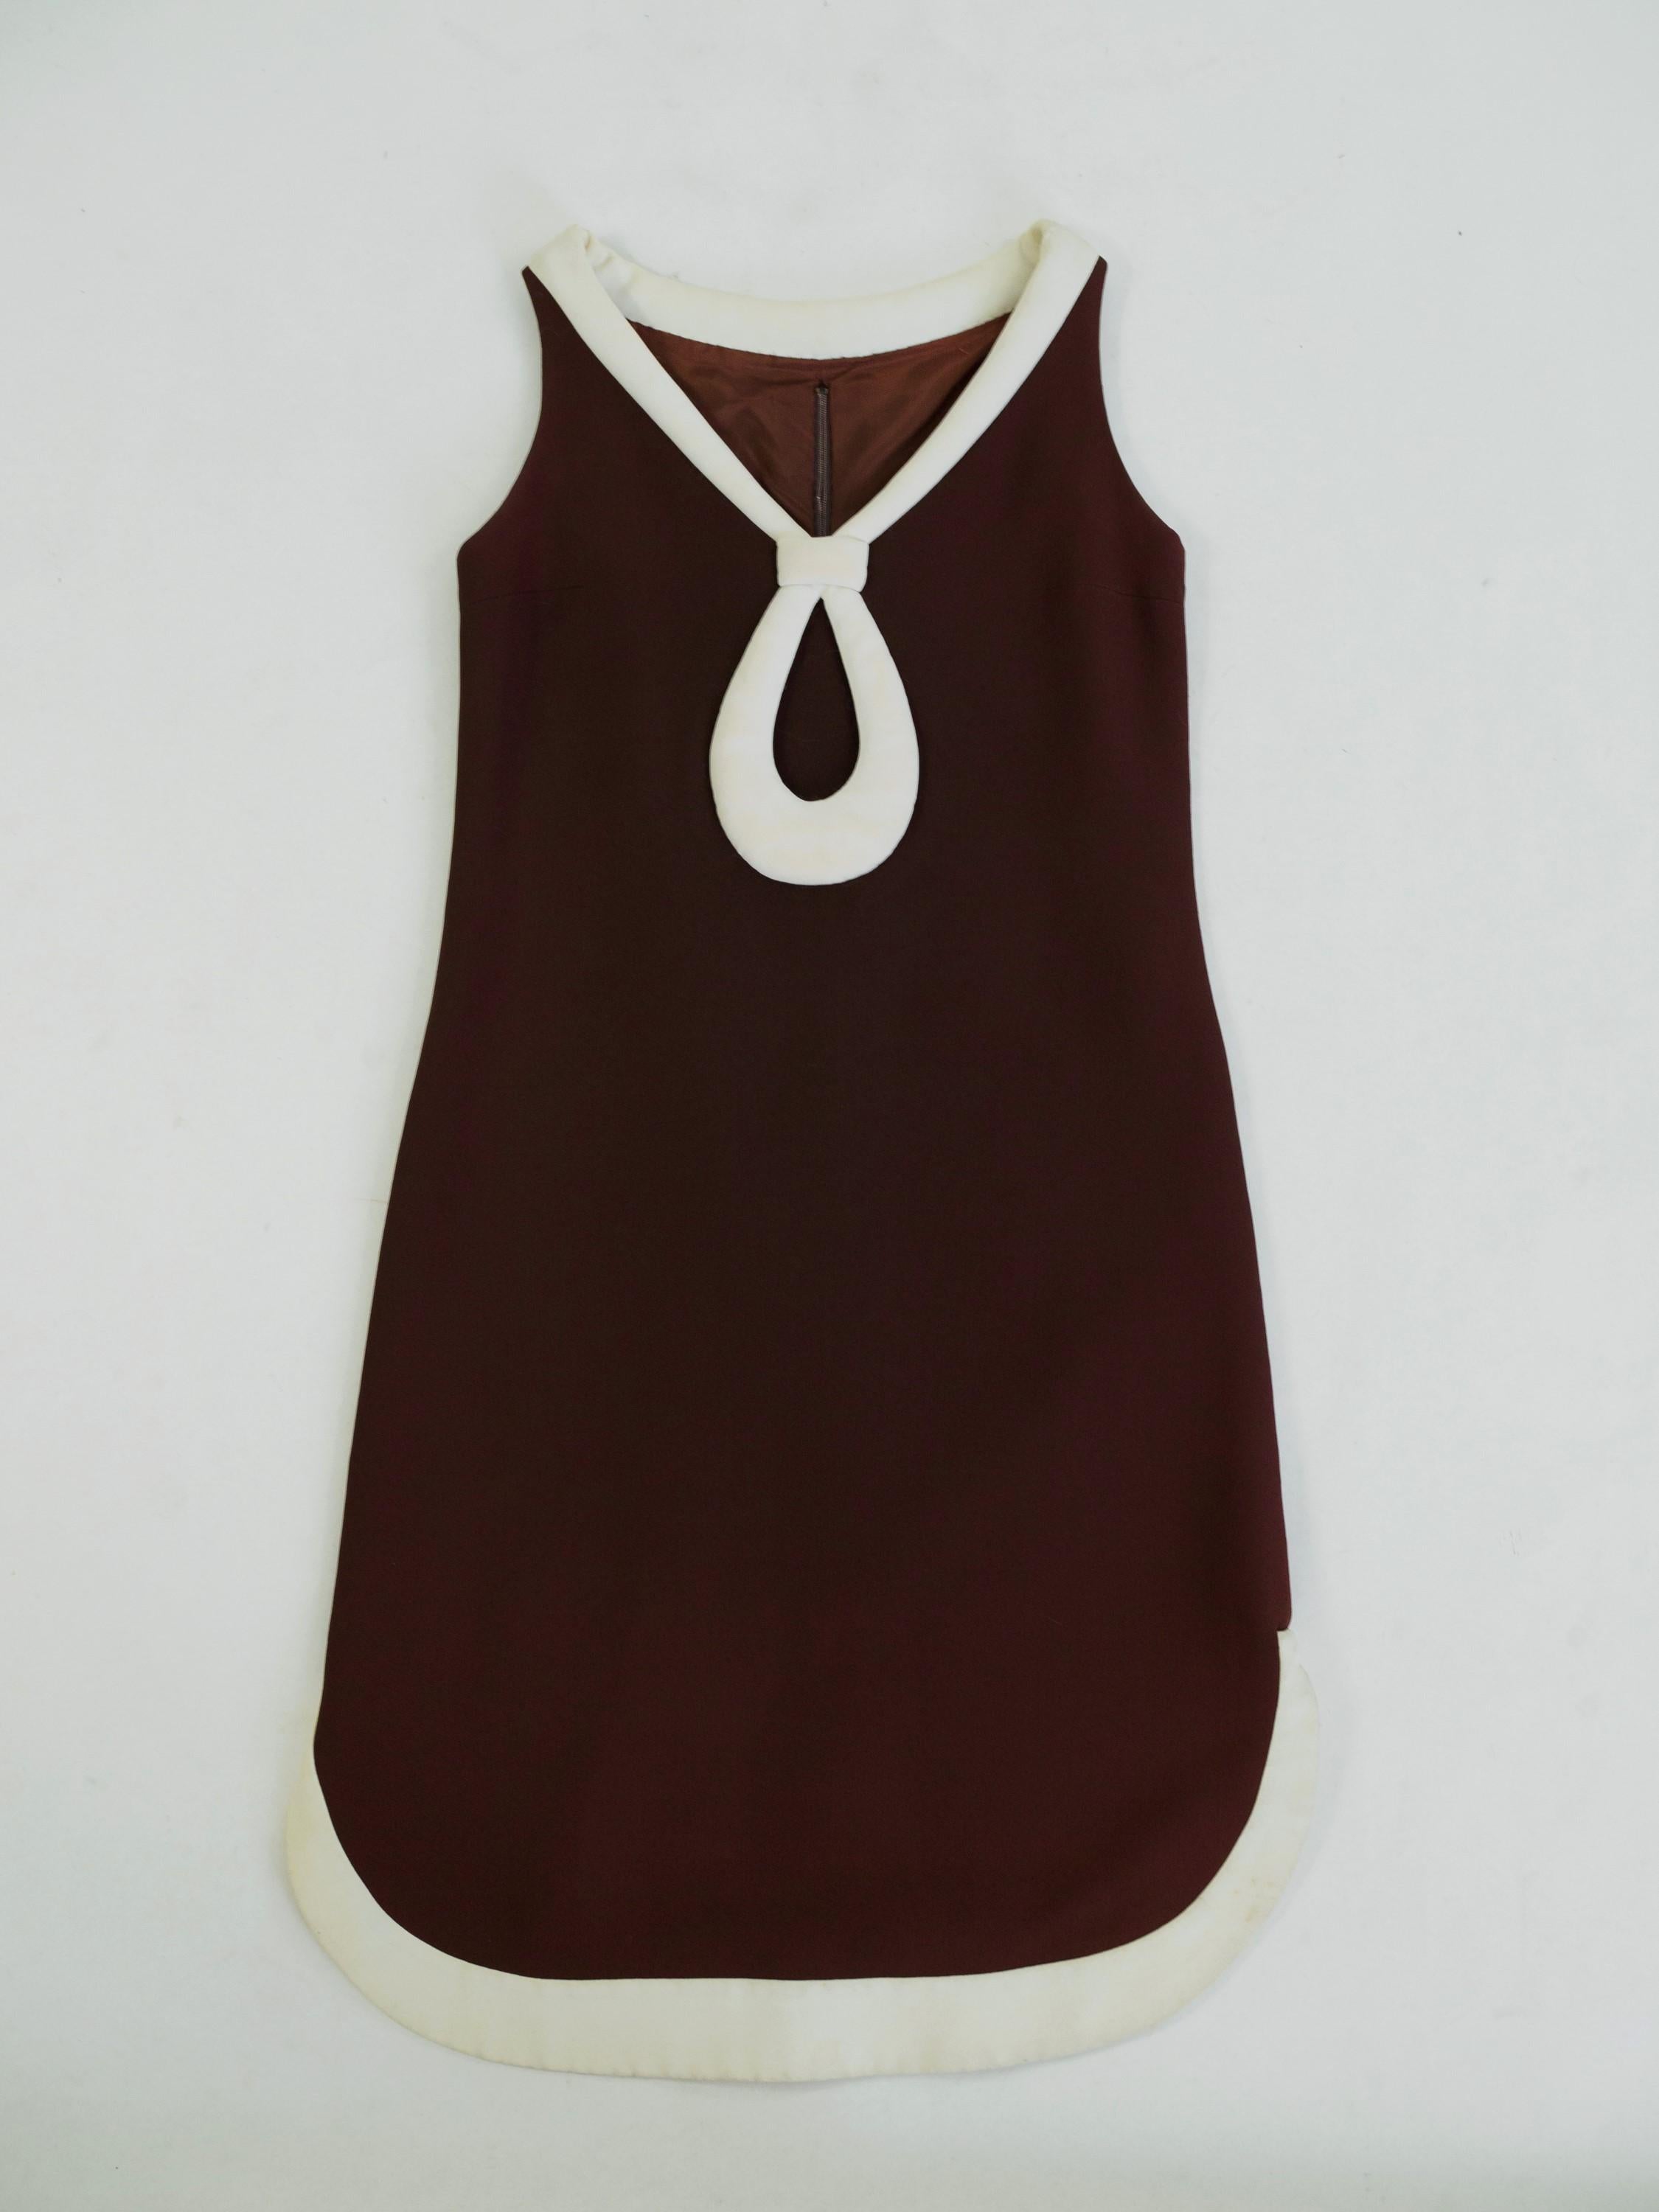 Circa 1970/1975

France

Astonishing dress from the futuristic or Space Age period by Pierre Cardin dating from the early 1970s. Sleeveless pinafore dress in thick chocolate jersey. Large pointed neckline underlined by a large cream bead in the